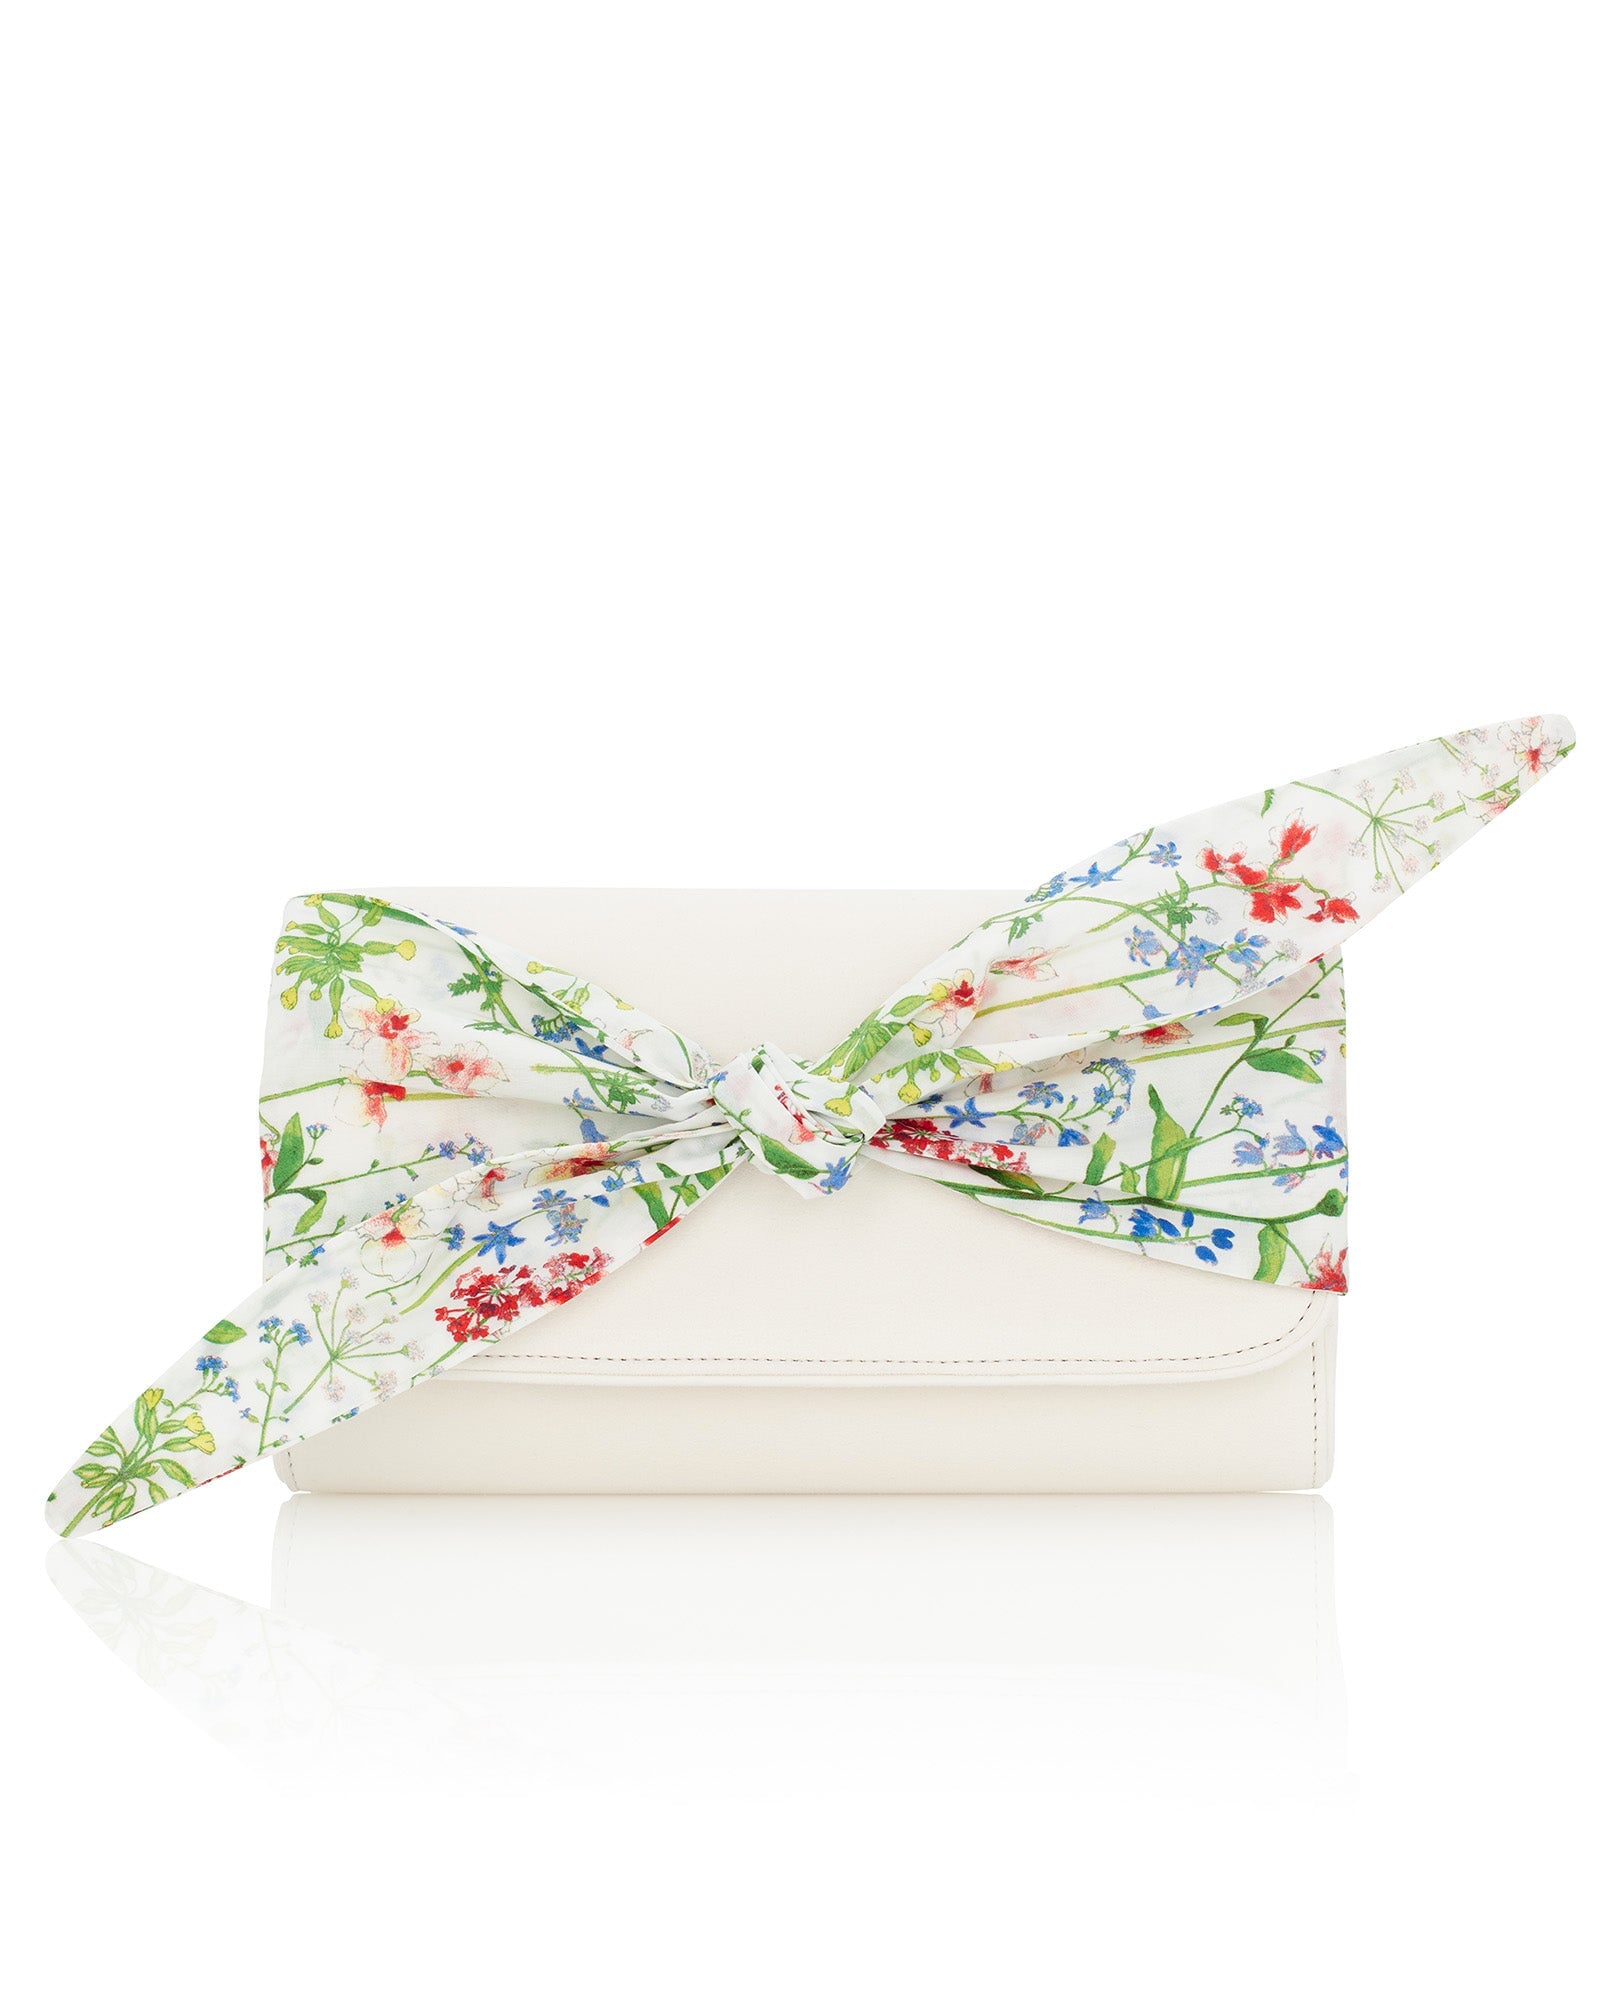 Florence Meadow Clutch Occasion Bag Ivory Suede Clutch Bag with Liberty Print Bow  image